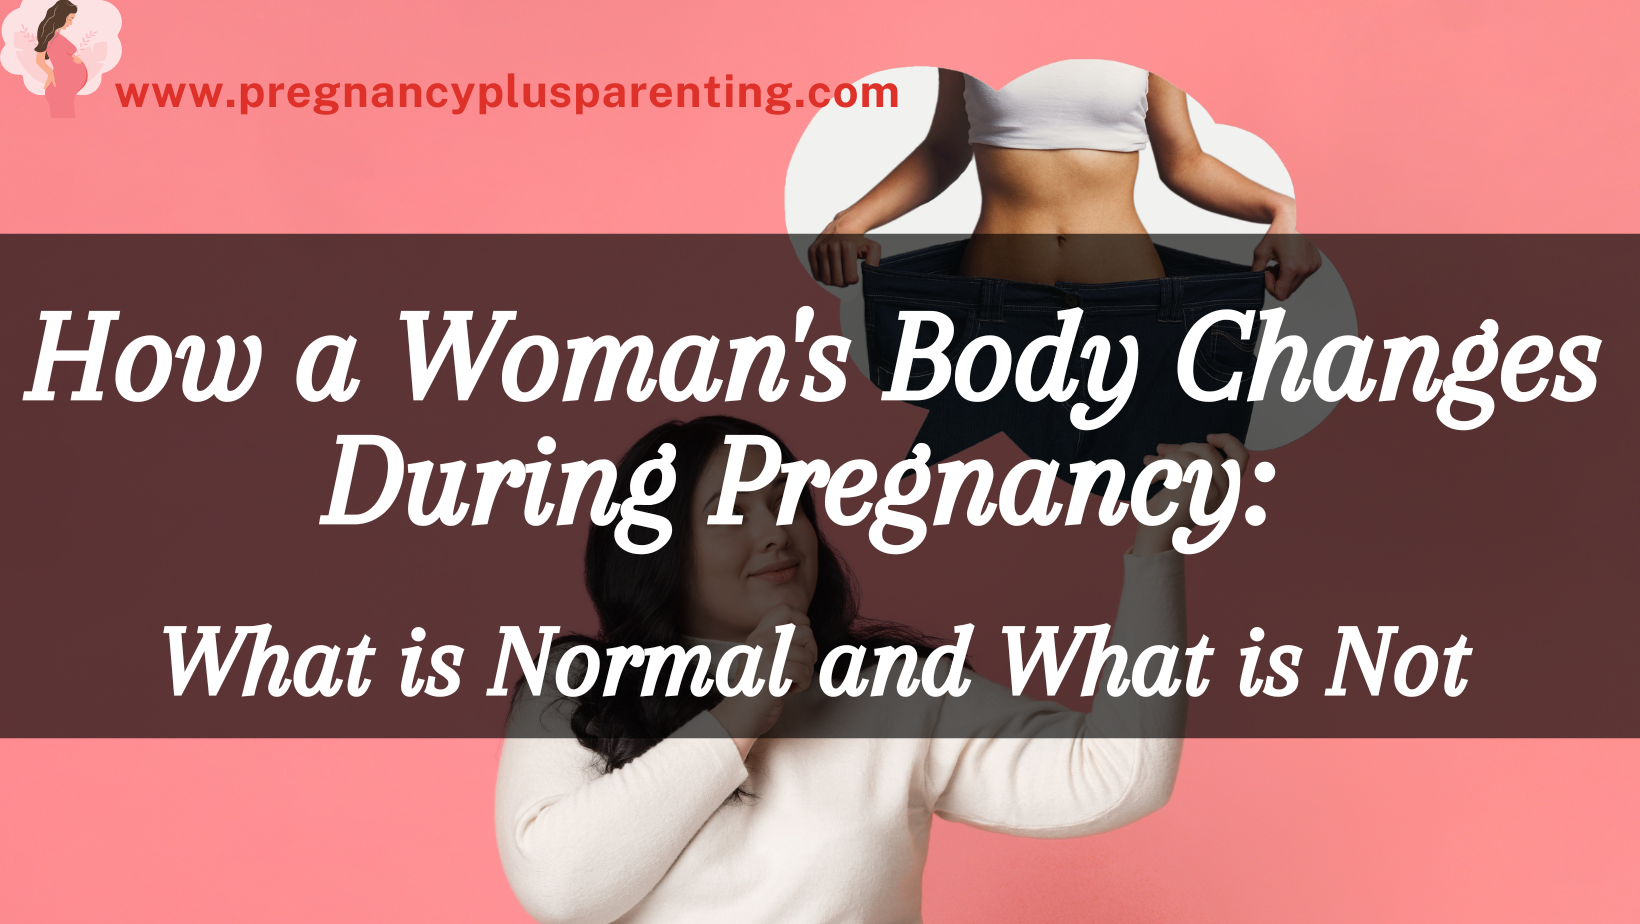 How a Woman's Body Changes During Pregnancy: What is Normal and What is Not